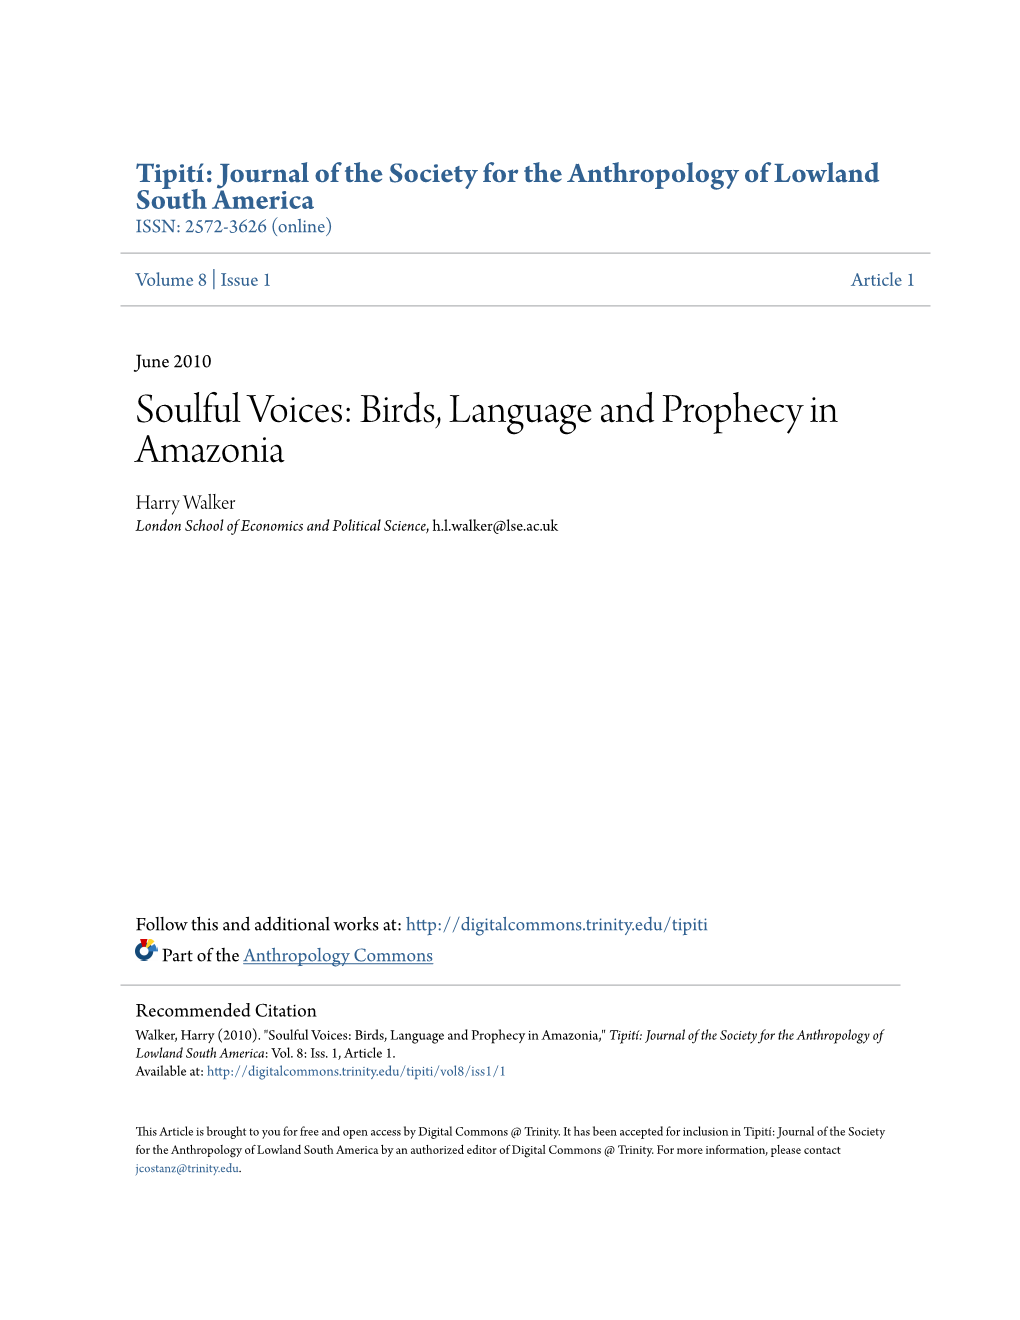 Soulful Voices: Birds, Language and Prophecy in Amazonia Harry Walker London School of Economics and Political Science, H.L.Walker@Lse.Ac.Uk